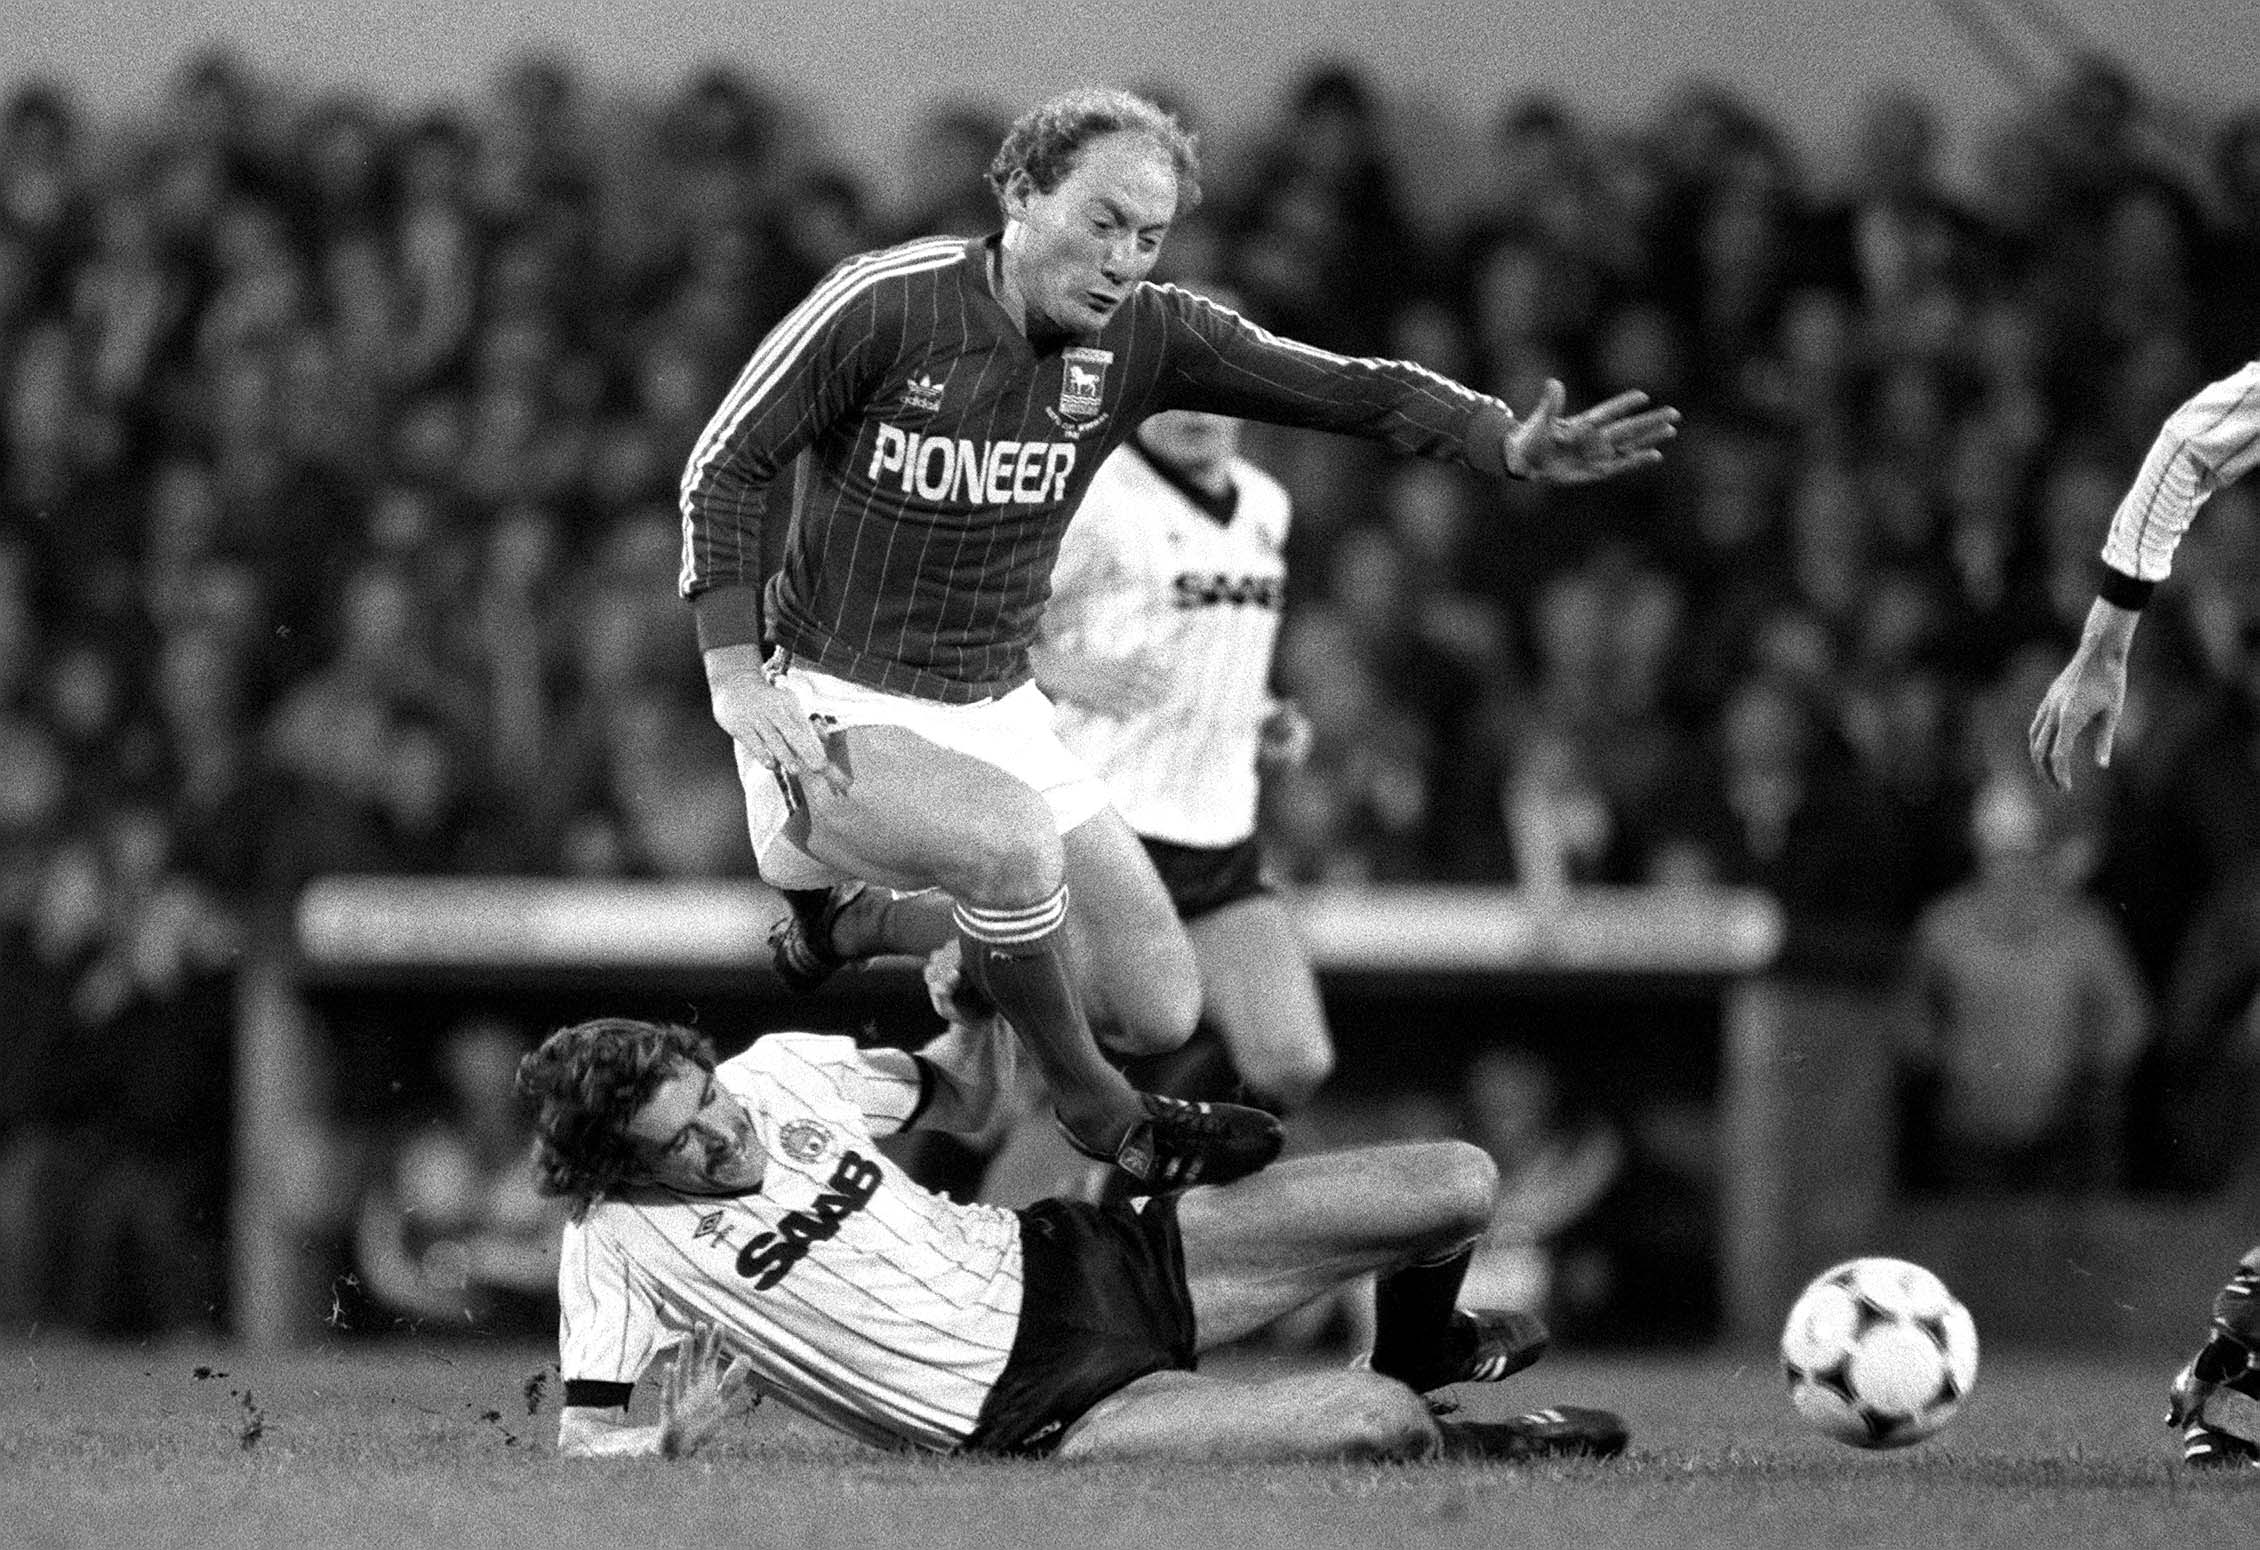 Alan Brazil feels the full force of this tackle by Manchester City’s Paul Power in 1982. (Mark Leech/Getty Images)